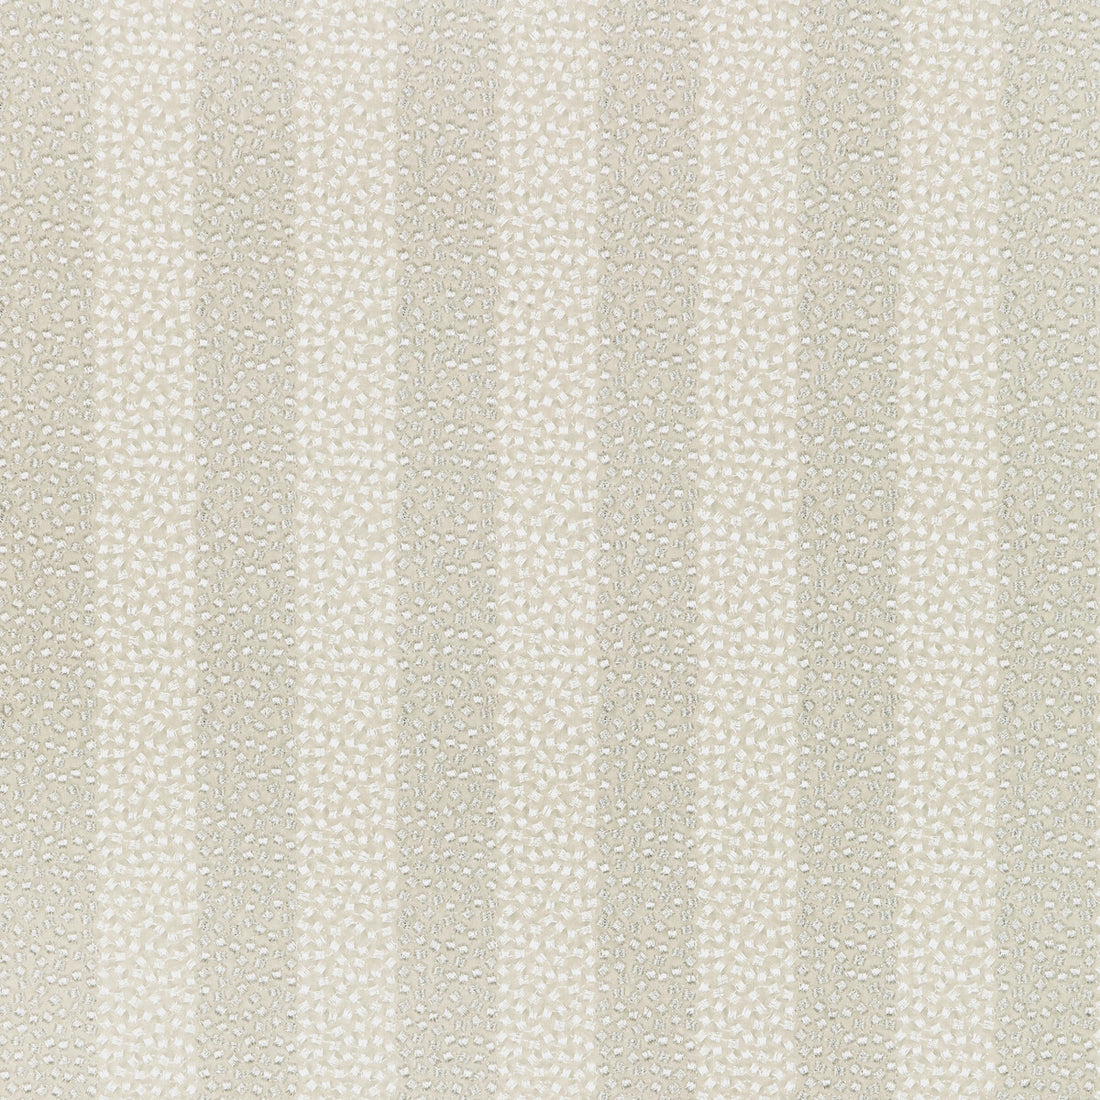 Proximity fabric in platinum color - pattern 36341.11.0 - by Kravet Couture in the Modern Luxe III collection